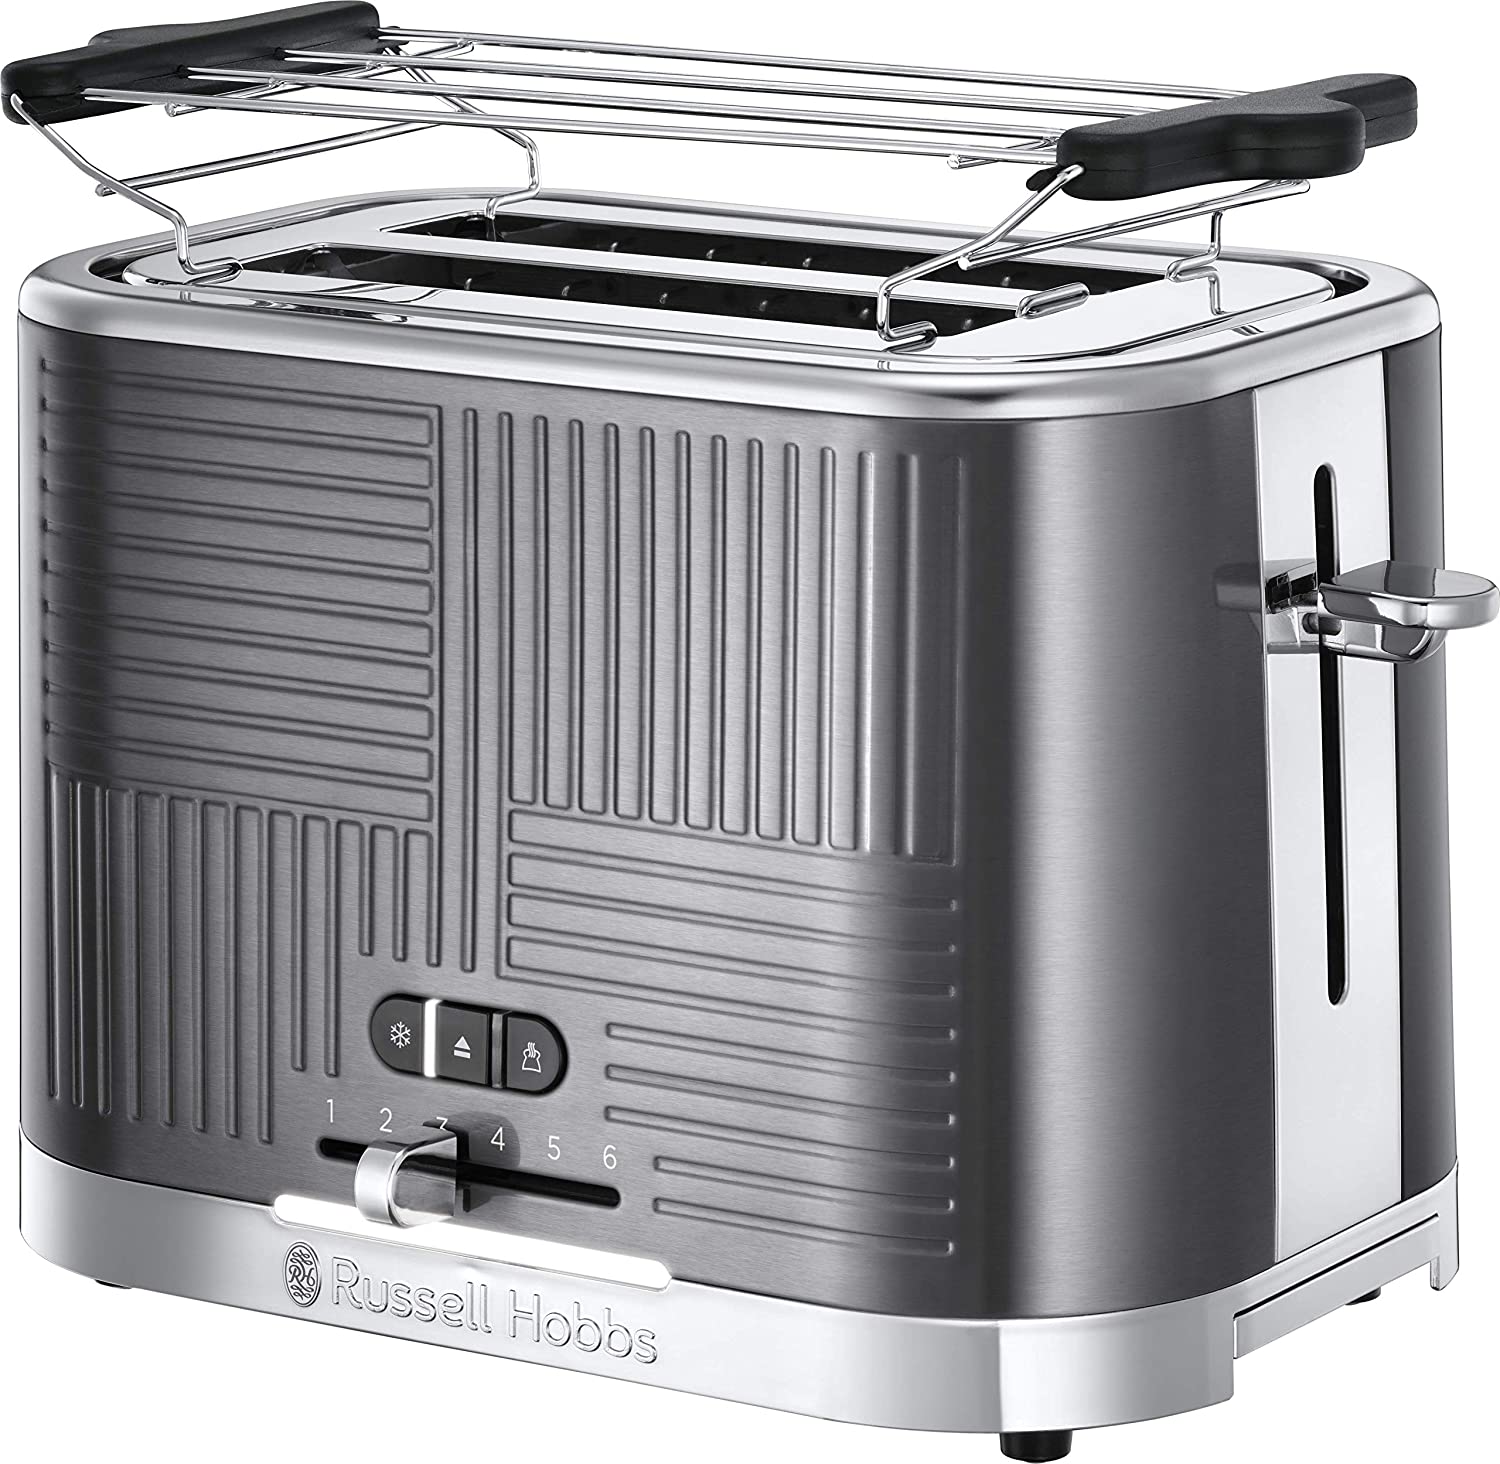 Russell Hobbs Geo Grey Stainless Steel Toaster, 2 Extra Wide Toast Slots, Includes Bun Attachment, 6 Adjustable Browning Levels + Defrost Function, Quick Toast Technology, 1640 W, 25250-56